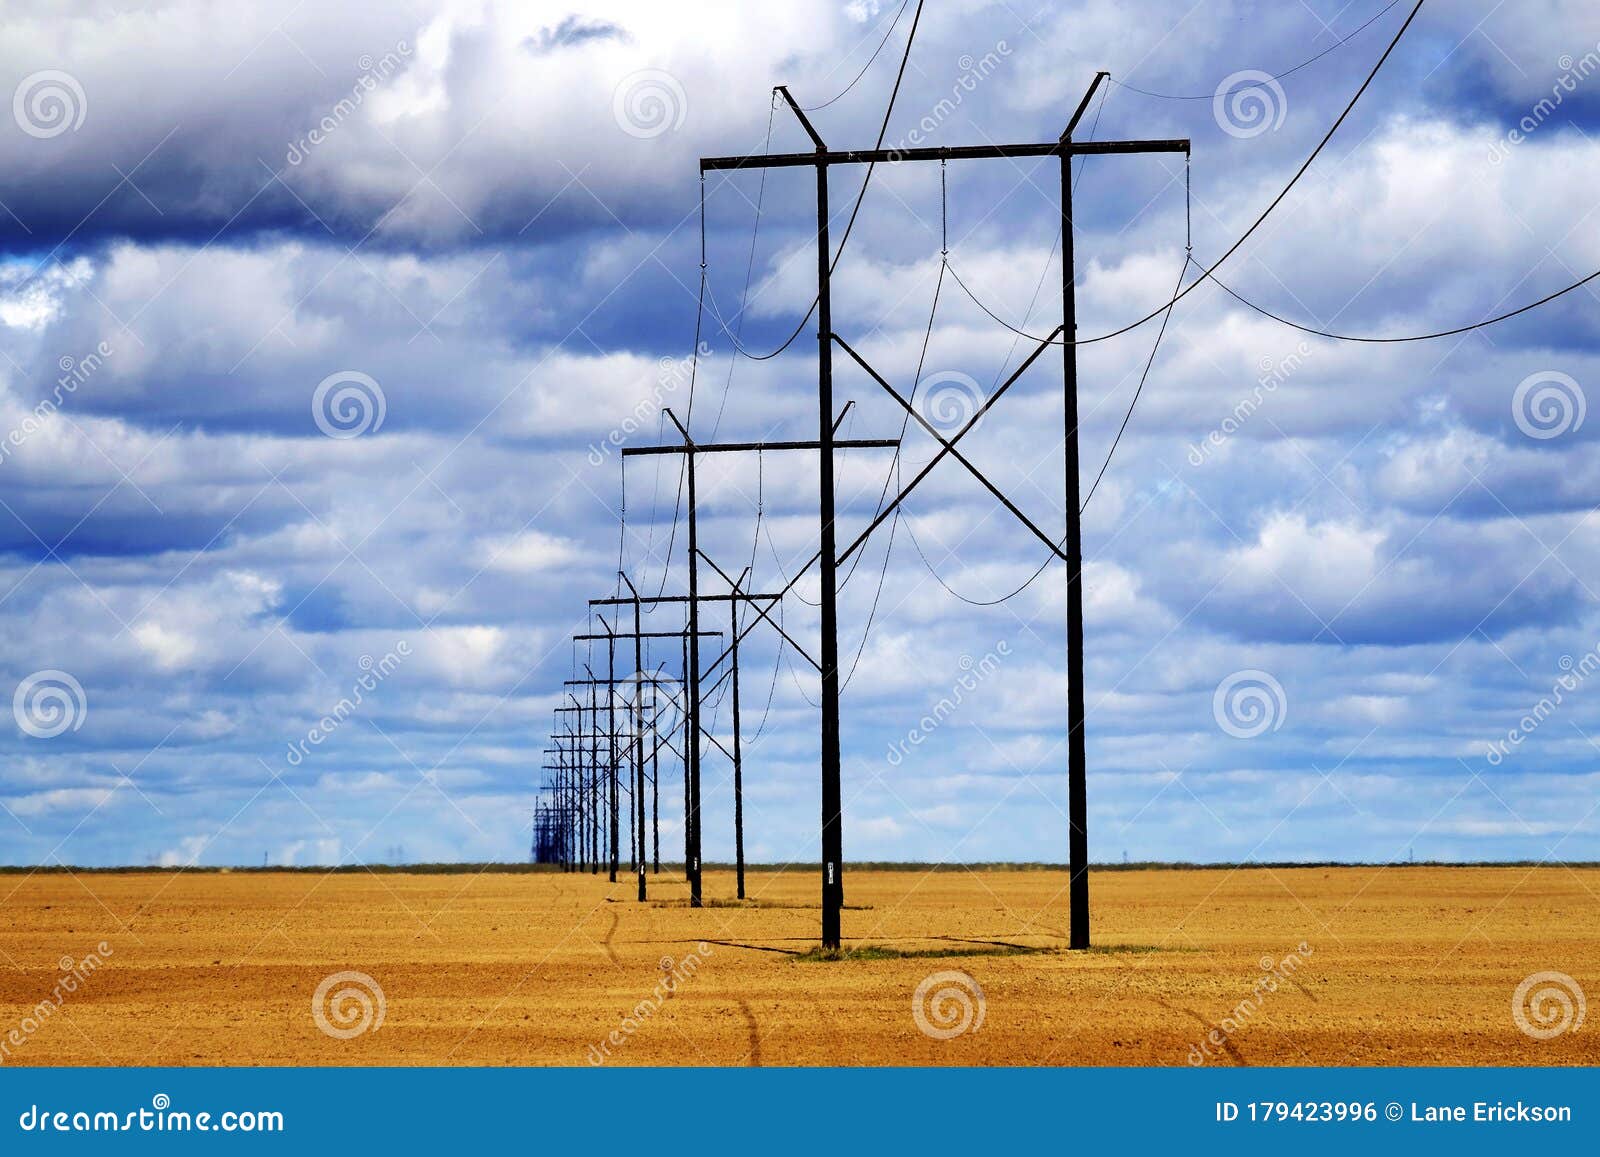 powerlines in field with blue sky and clouds